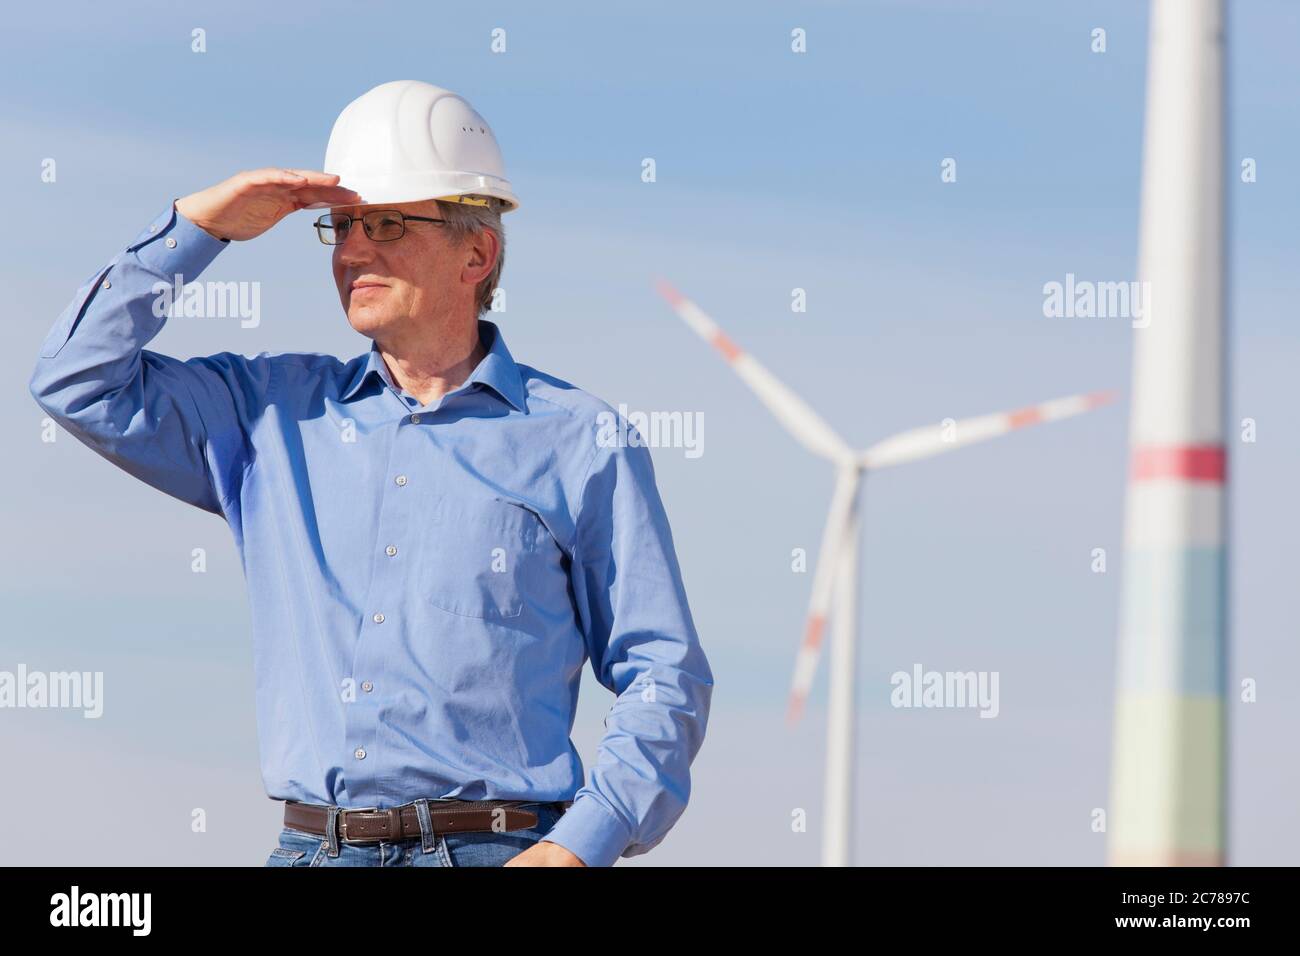 Engineer with hard hat in front of a windfarm looking for a bright future for green energy - focus on the person Stock Photo